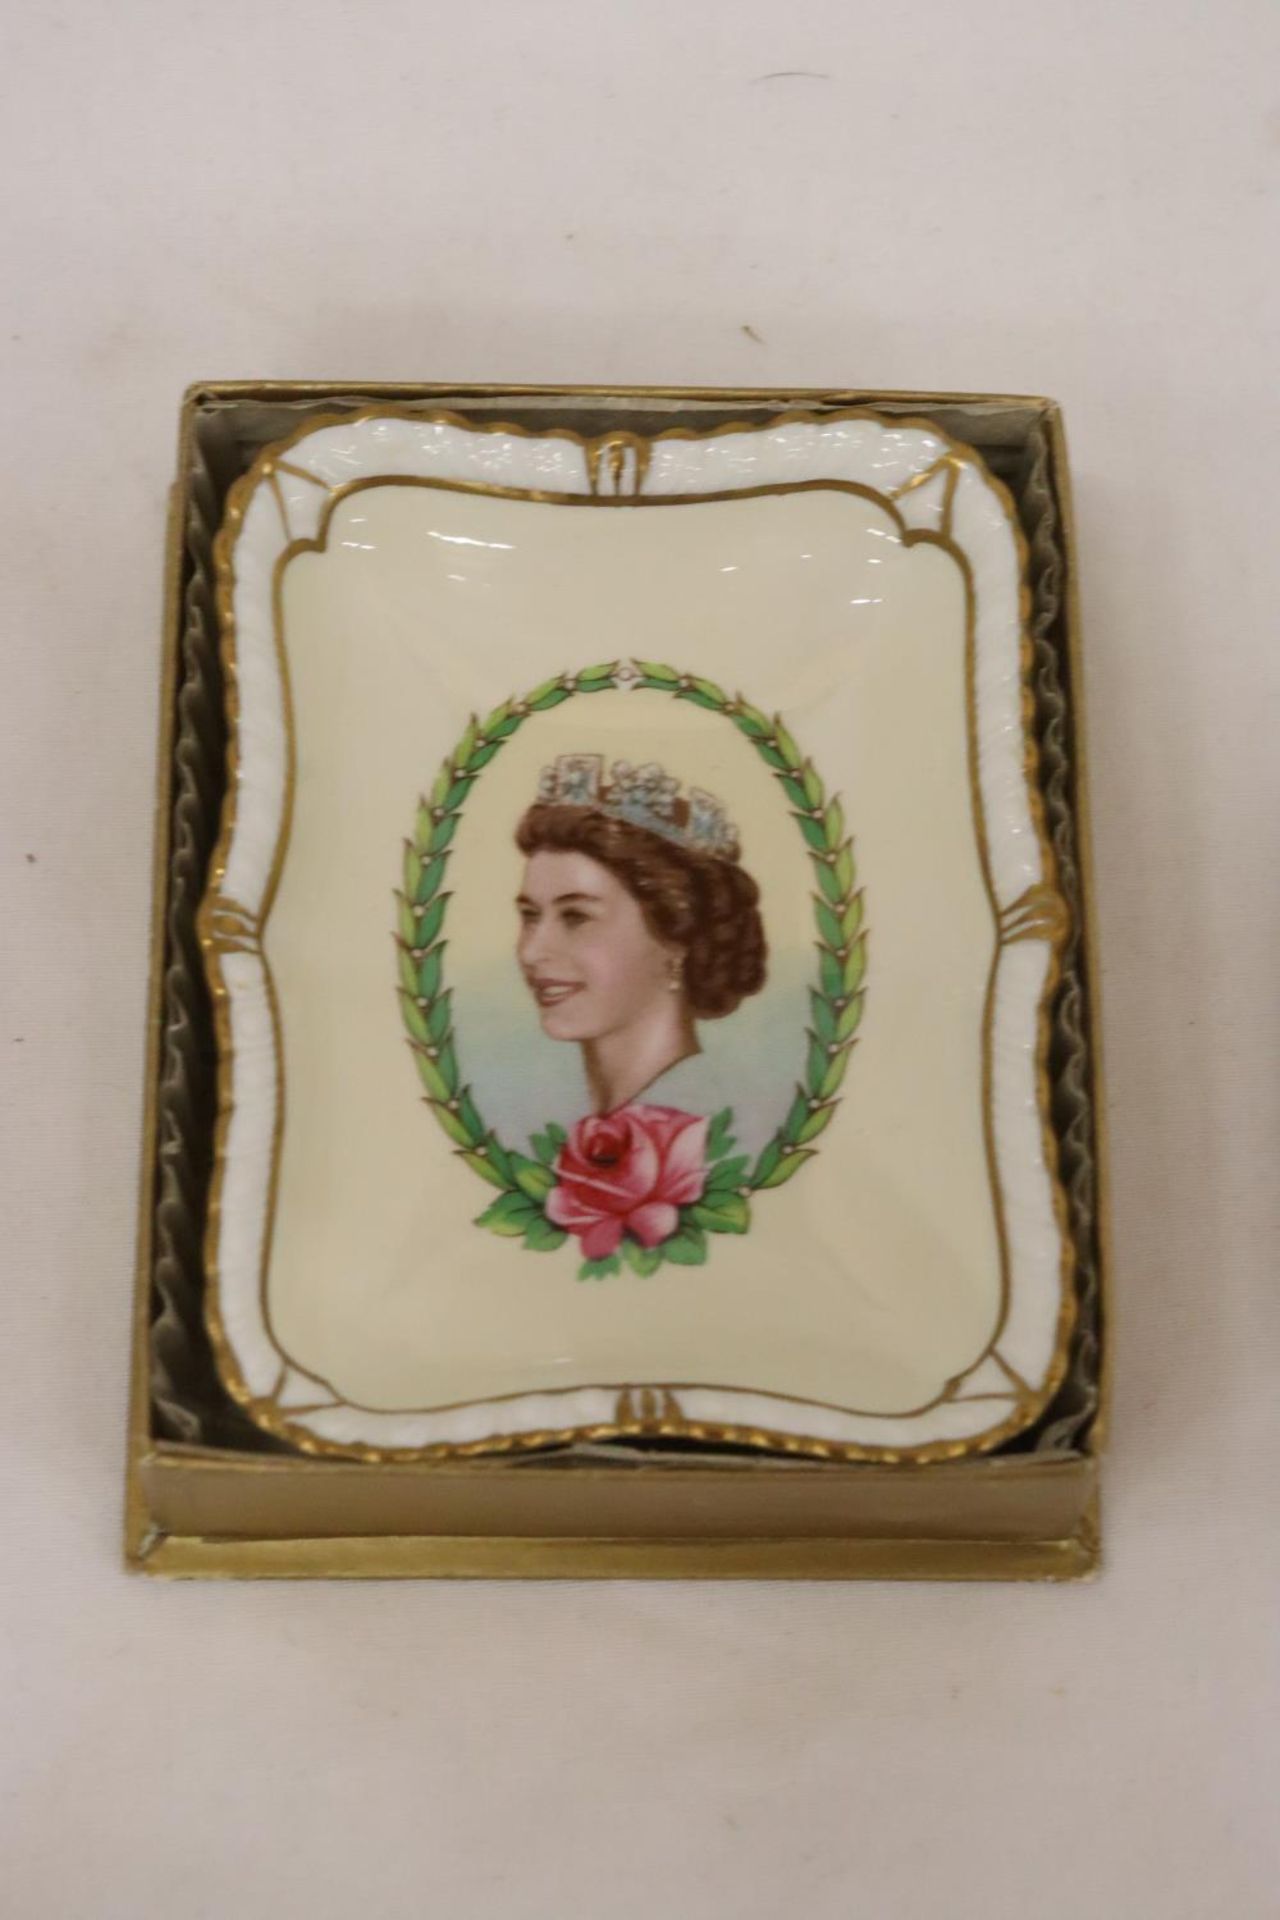 A 1953 CORONATION ROYAL CROWN DERBY PIN DISH AND POCKET KNIFE - Image 2 of 6